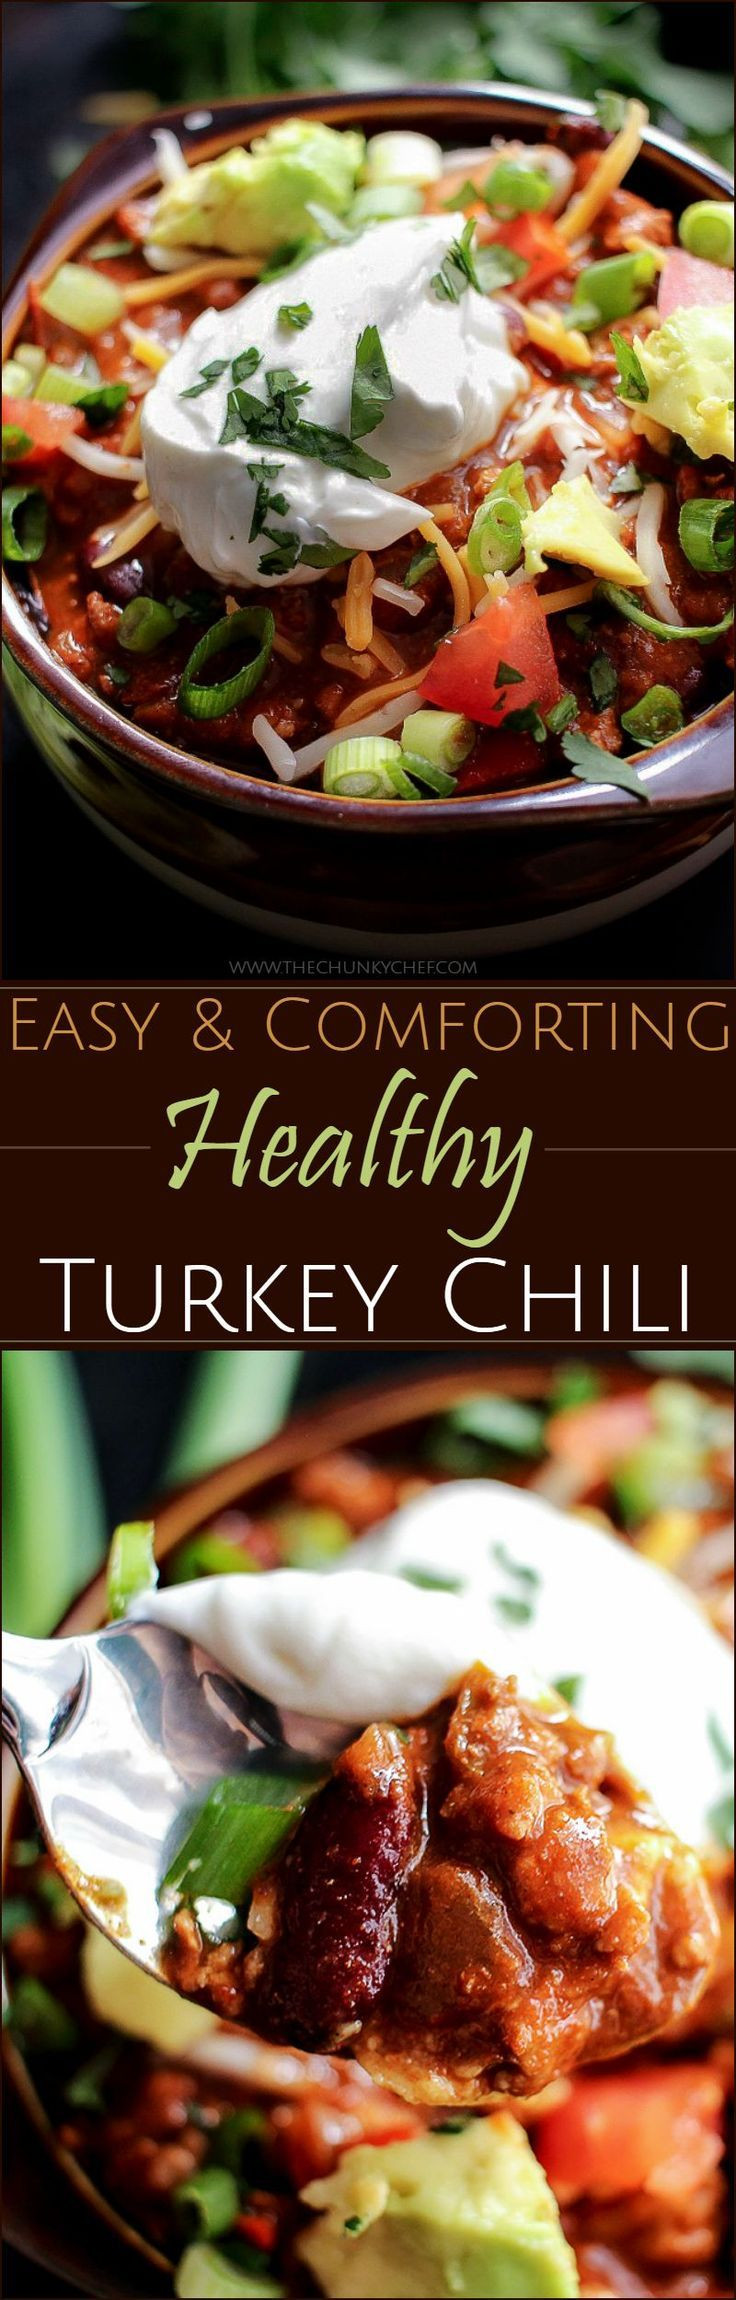 Recipes For Heart Healthy Meals
 Best 25 Healthy turkey chili ideas on Pinterest